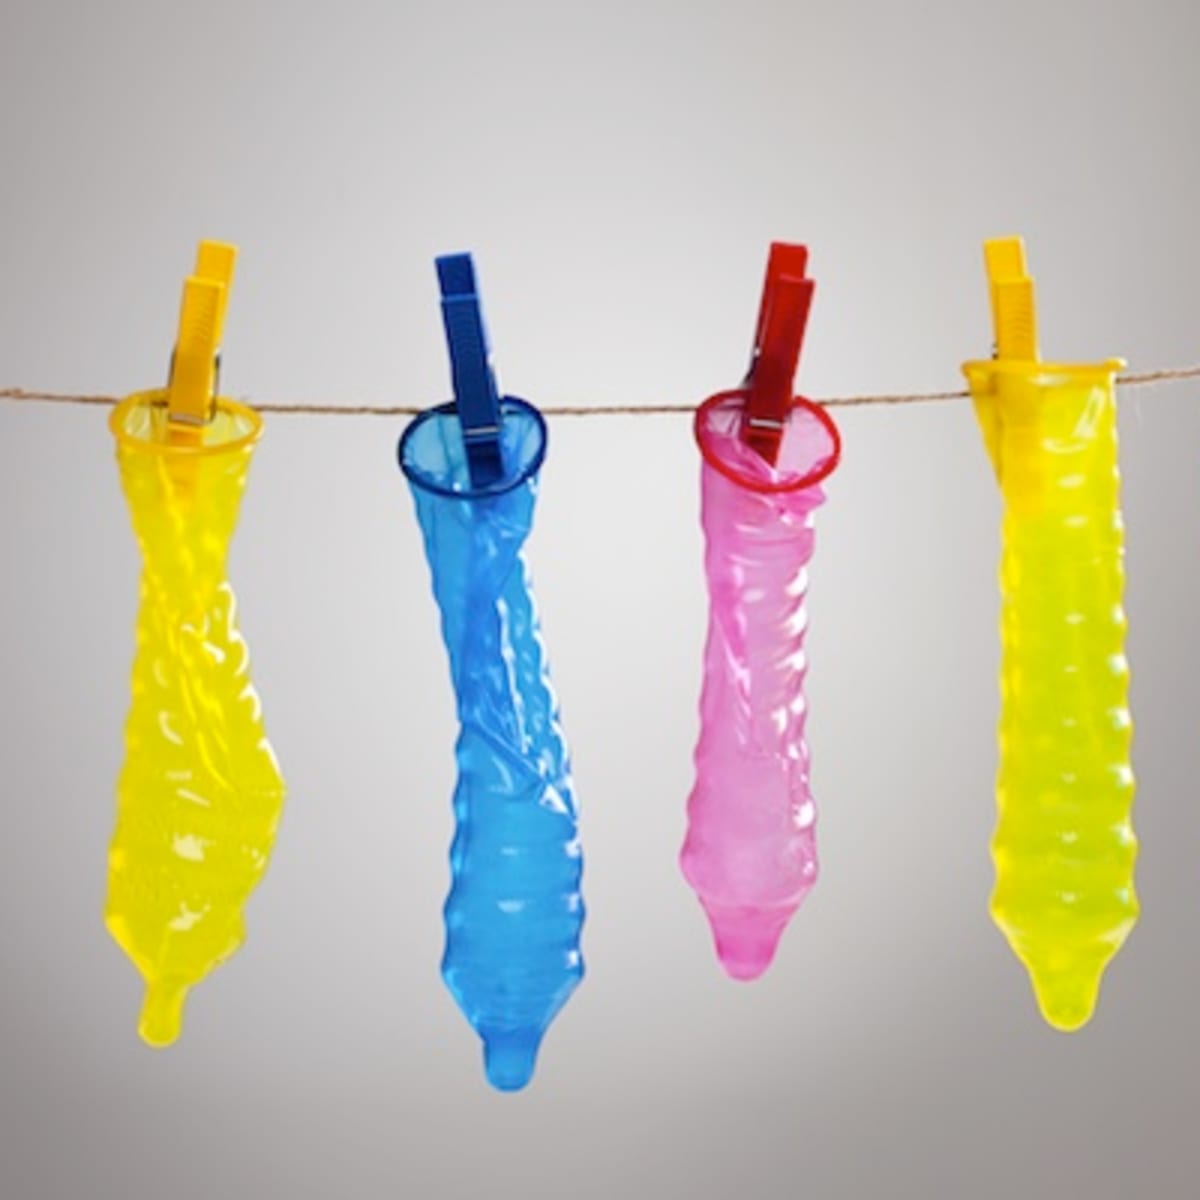 Why Dont We Use Condoms for Oral Sex? pic